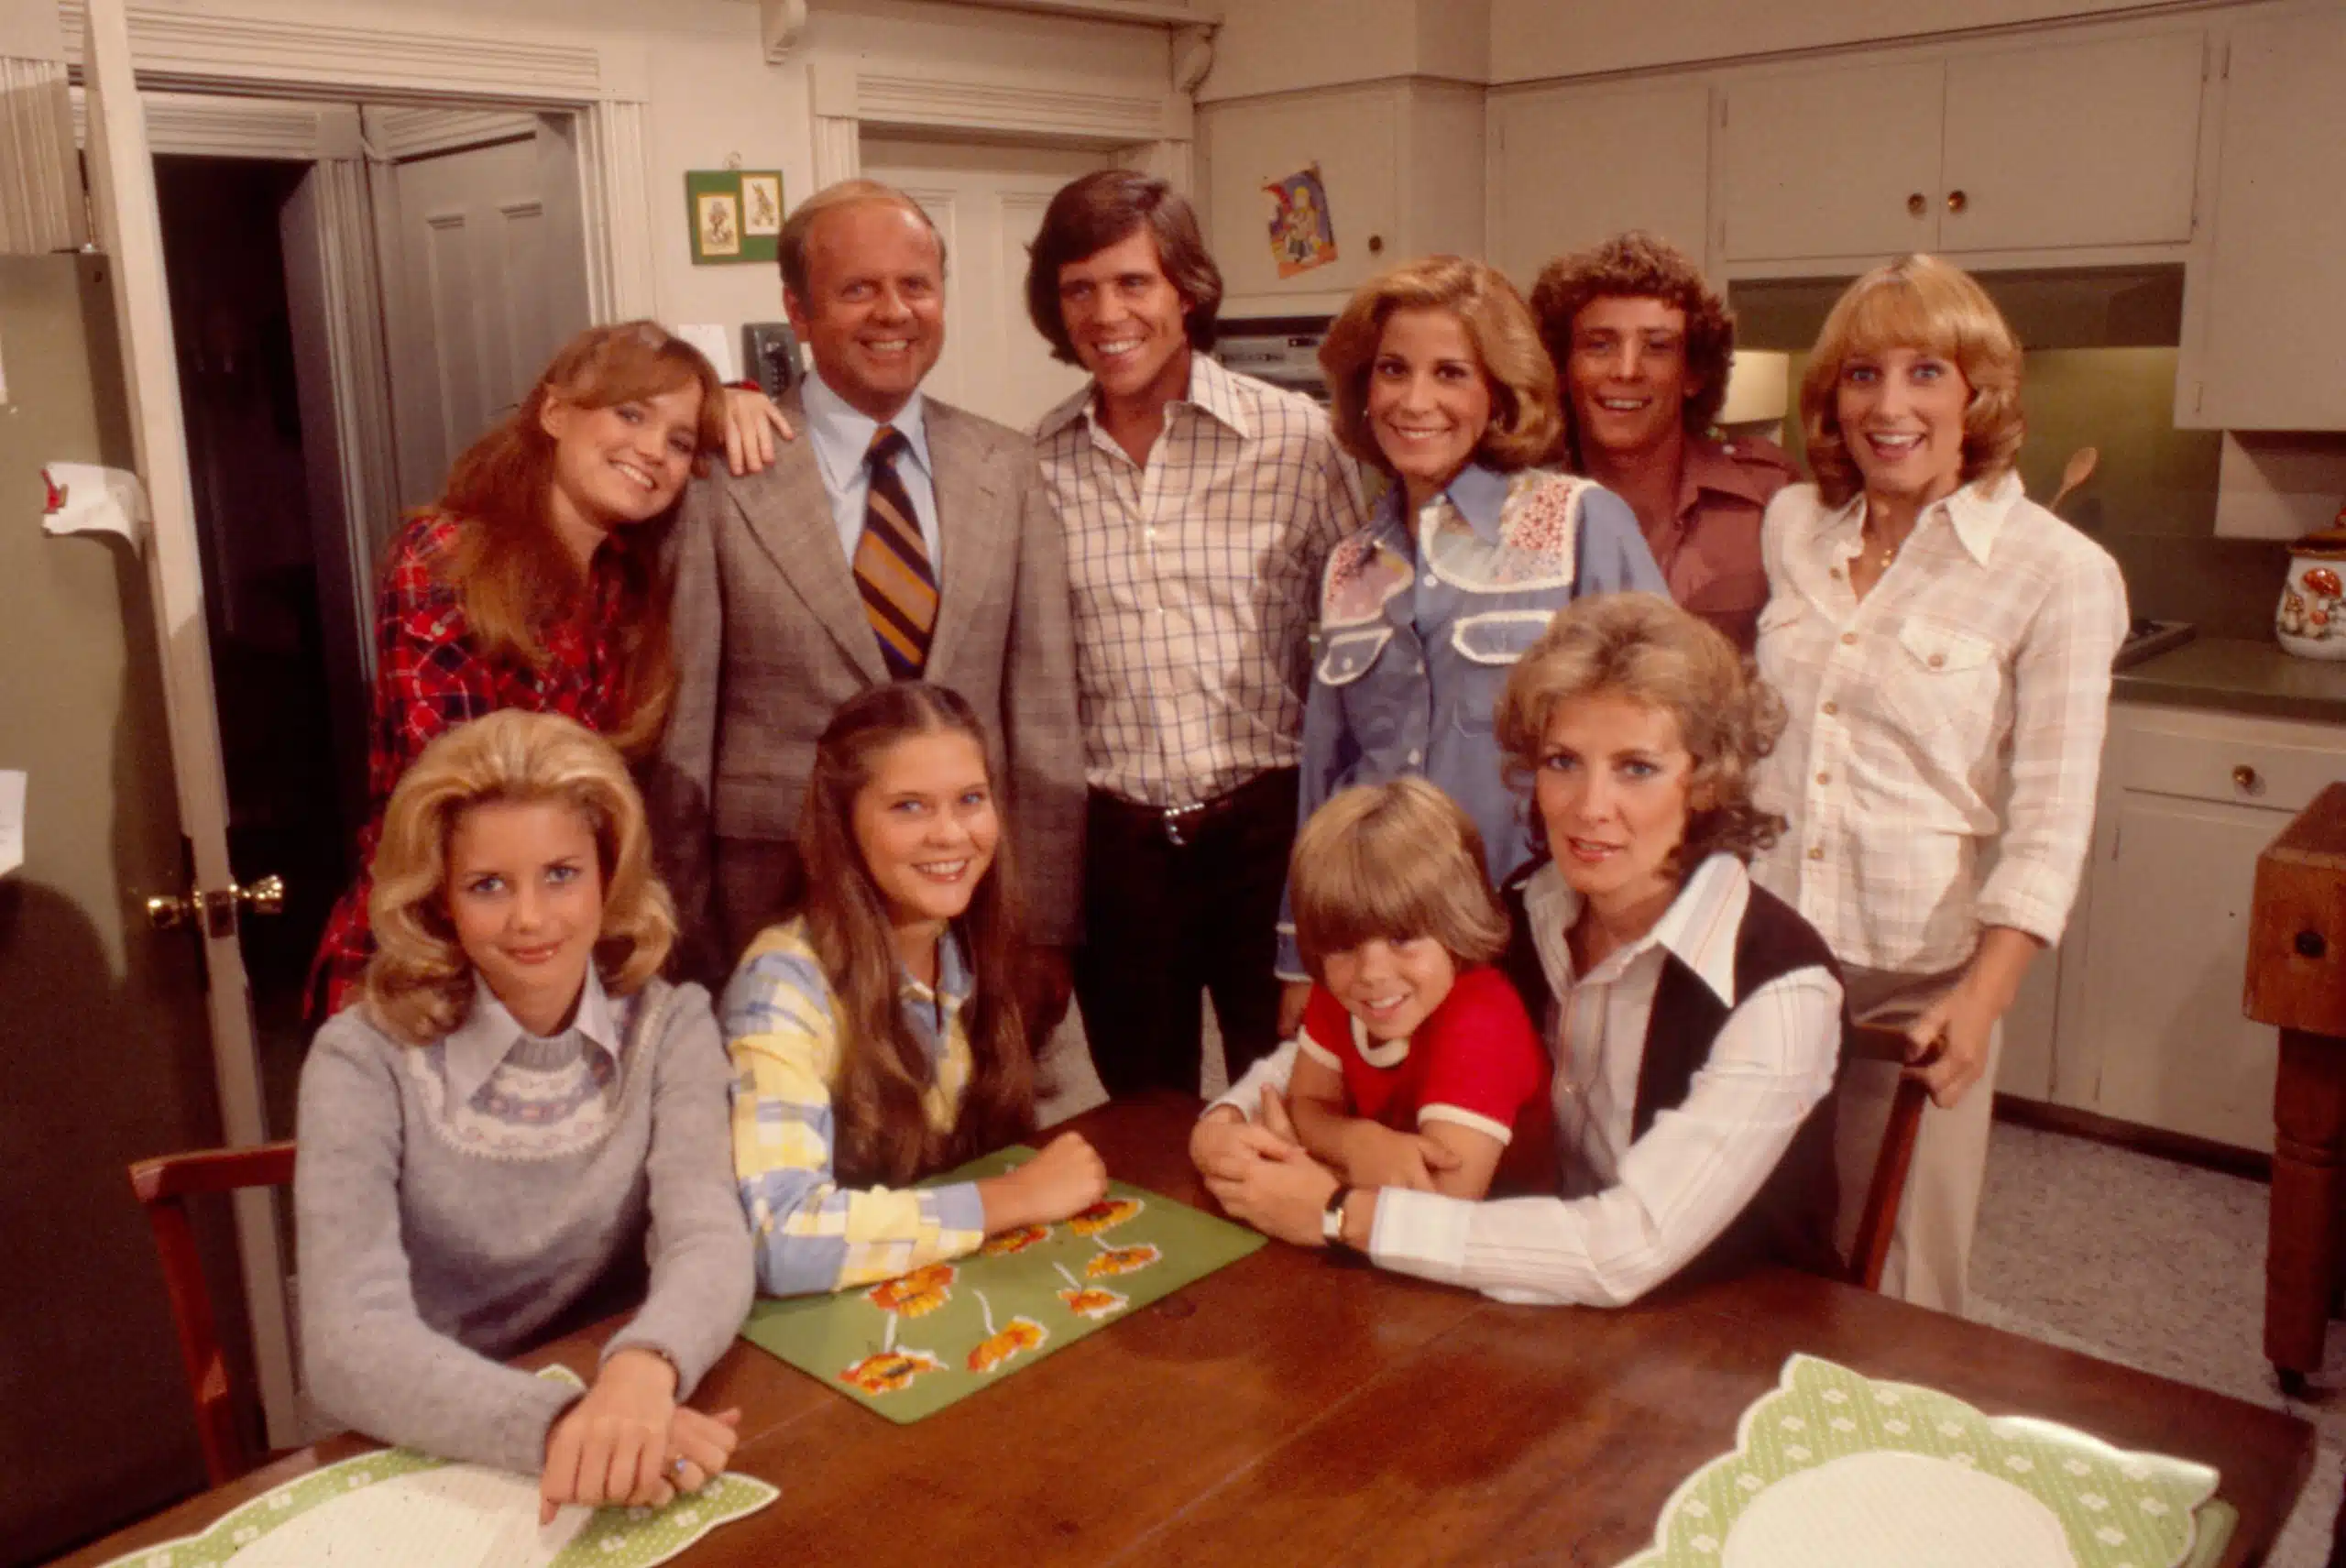 EIGHT IS ENOUGH, (back row, from left): Susan Richardson, Dick Van Patten, Grant Goodeve, Lani O'Grady, Willie Aames, Laurie Walters; front from left: Dianne Kay, Connie Newton, Adam Rich, Betty Buckley, 1977-81